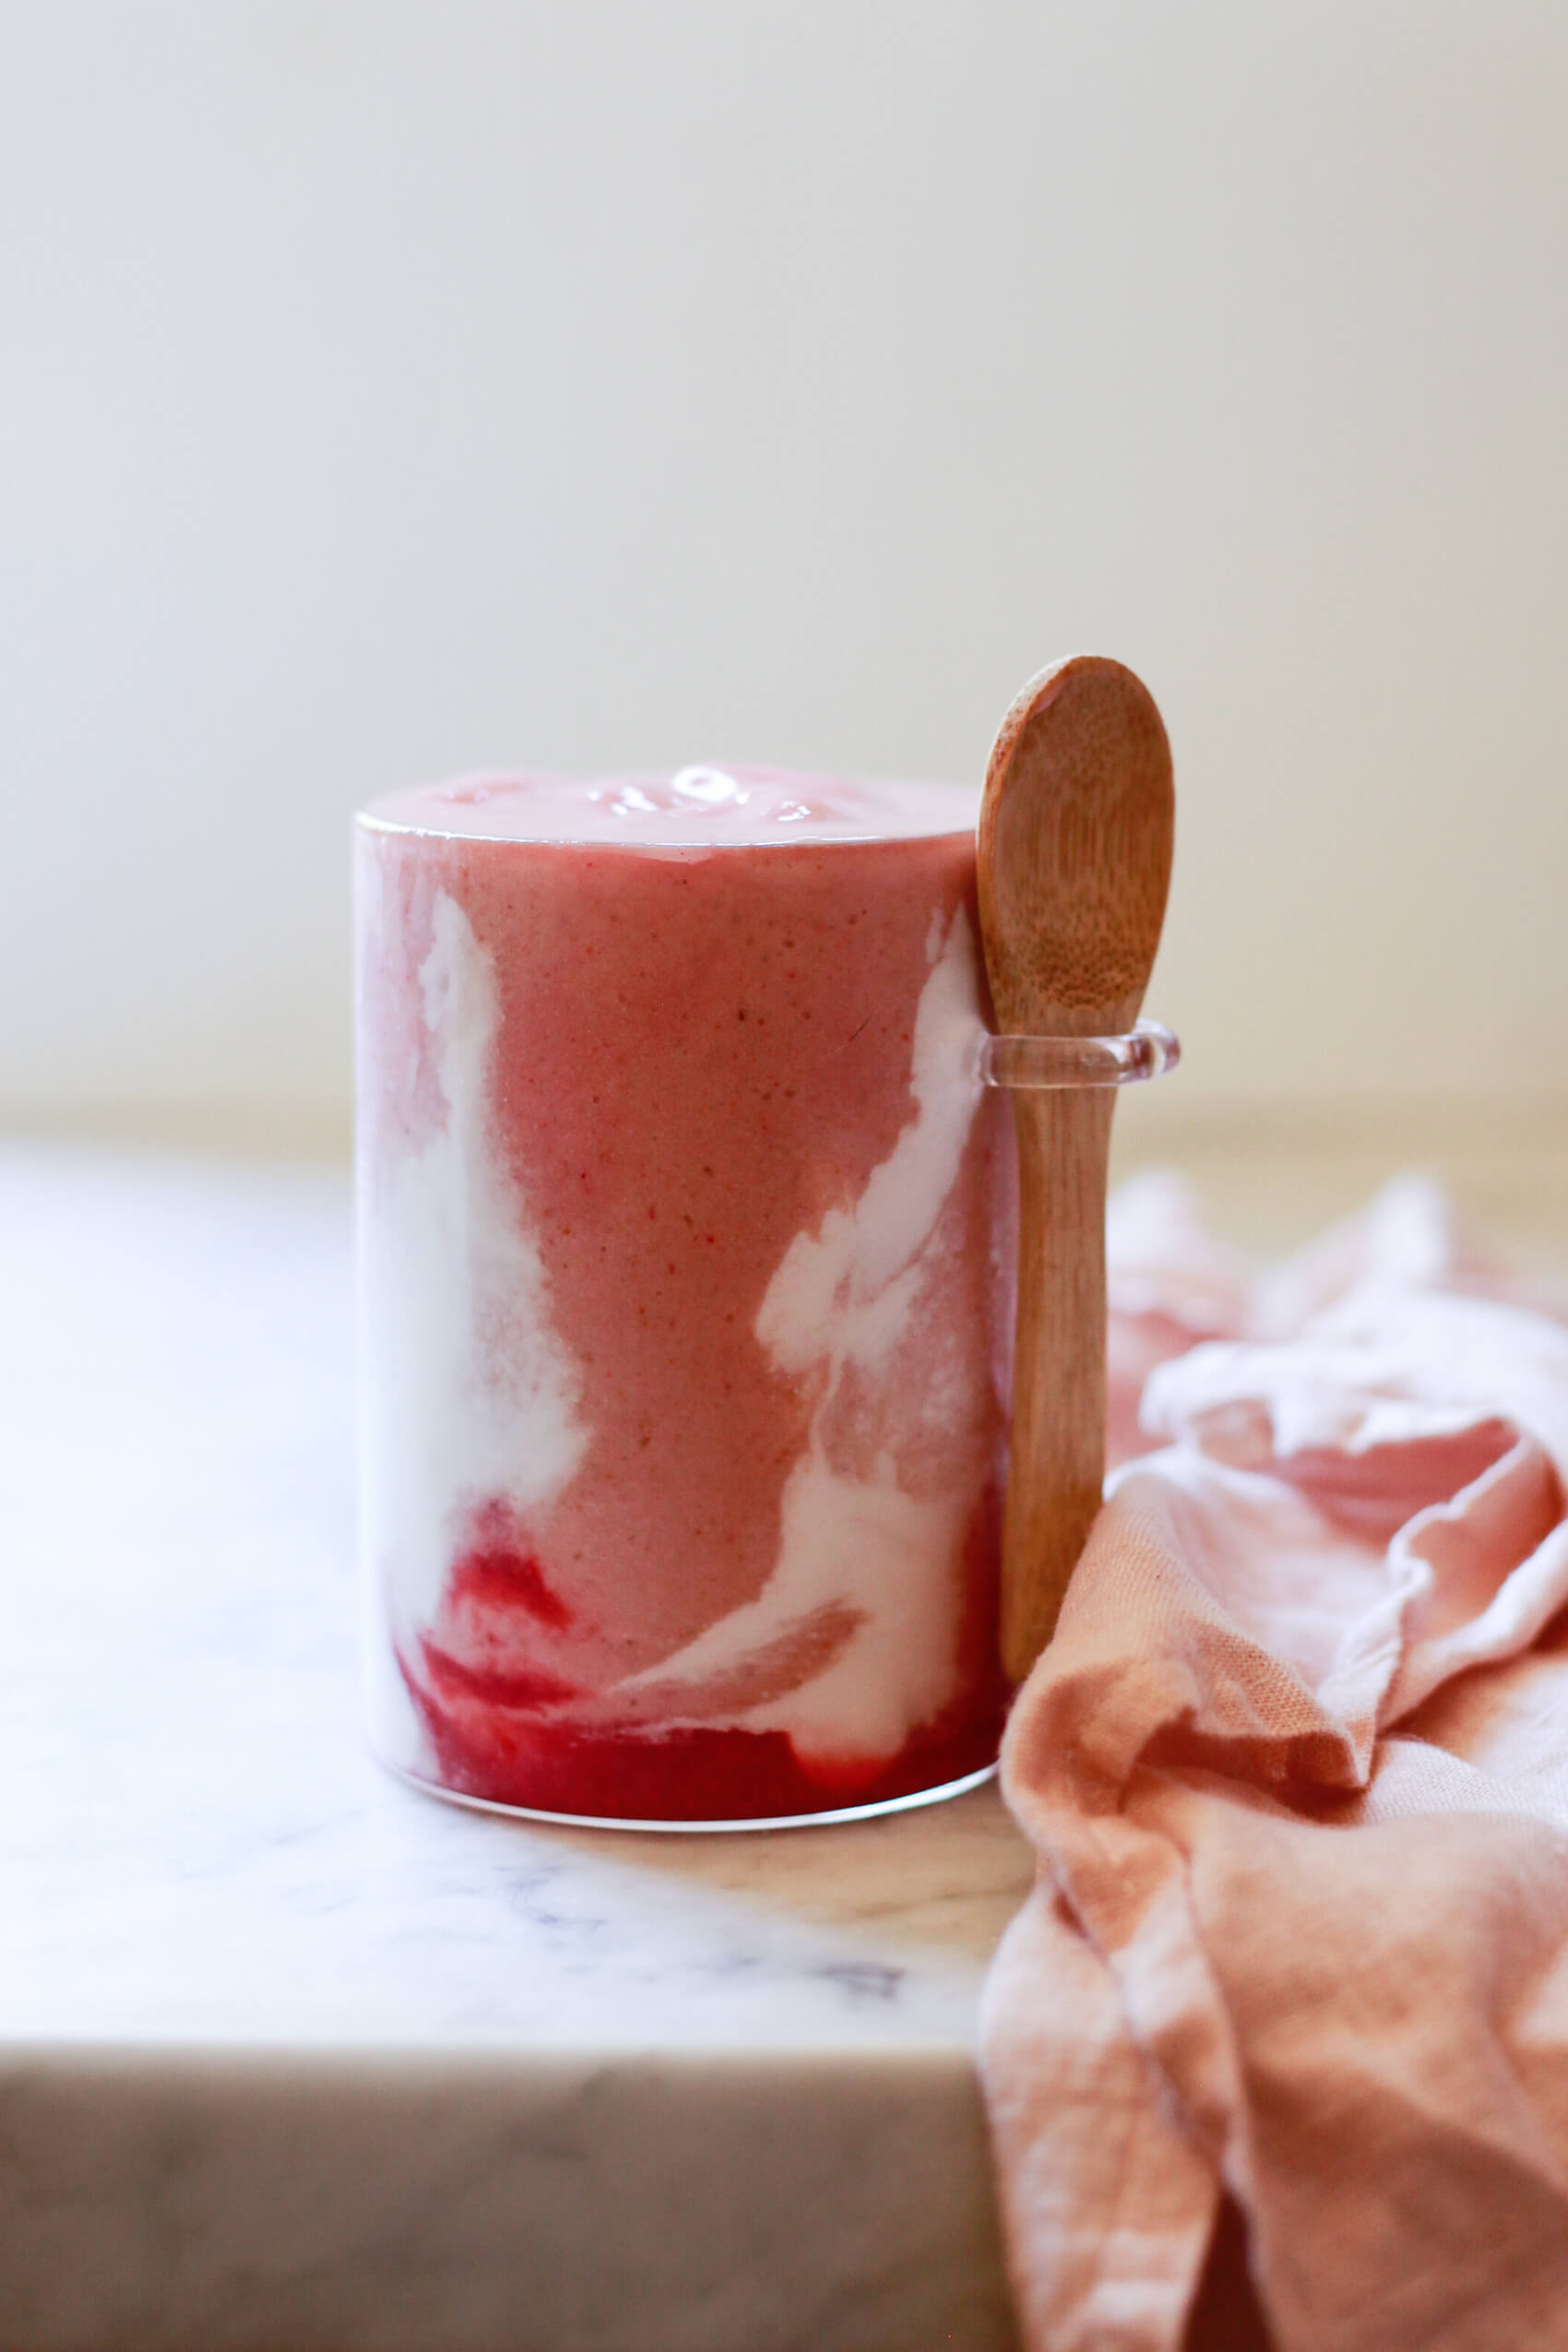 A beautiful copycat Hailey Bieber smoothie just like the Erewhon smoothie sits on a marble kitchen counter. The strawberry smoothie has red and white swirls and is in a jar with an attached wooden spoon. 